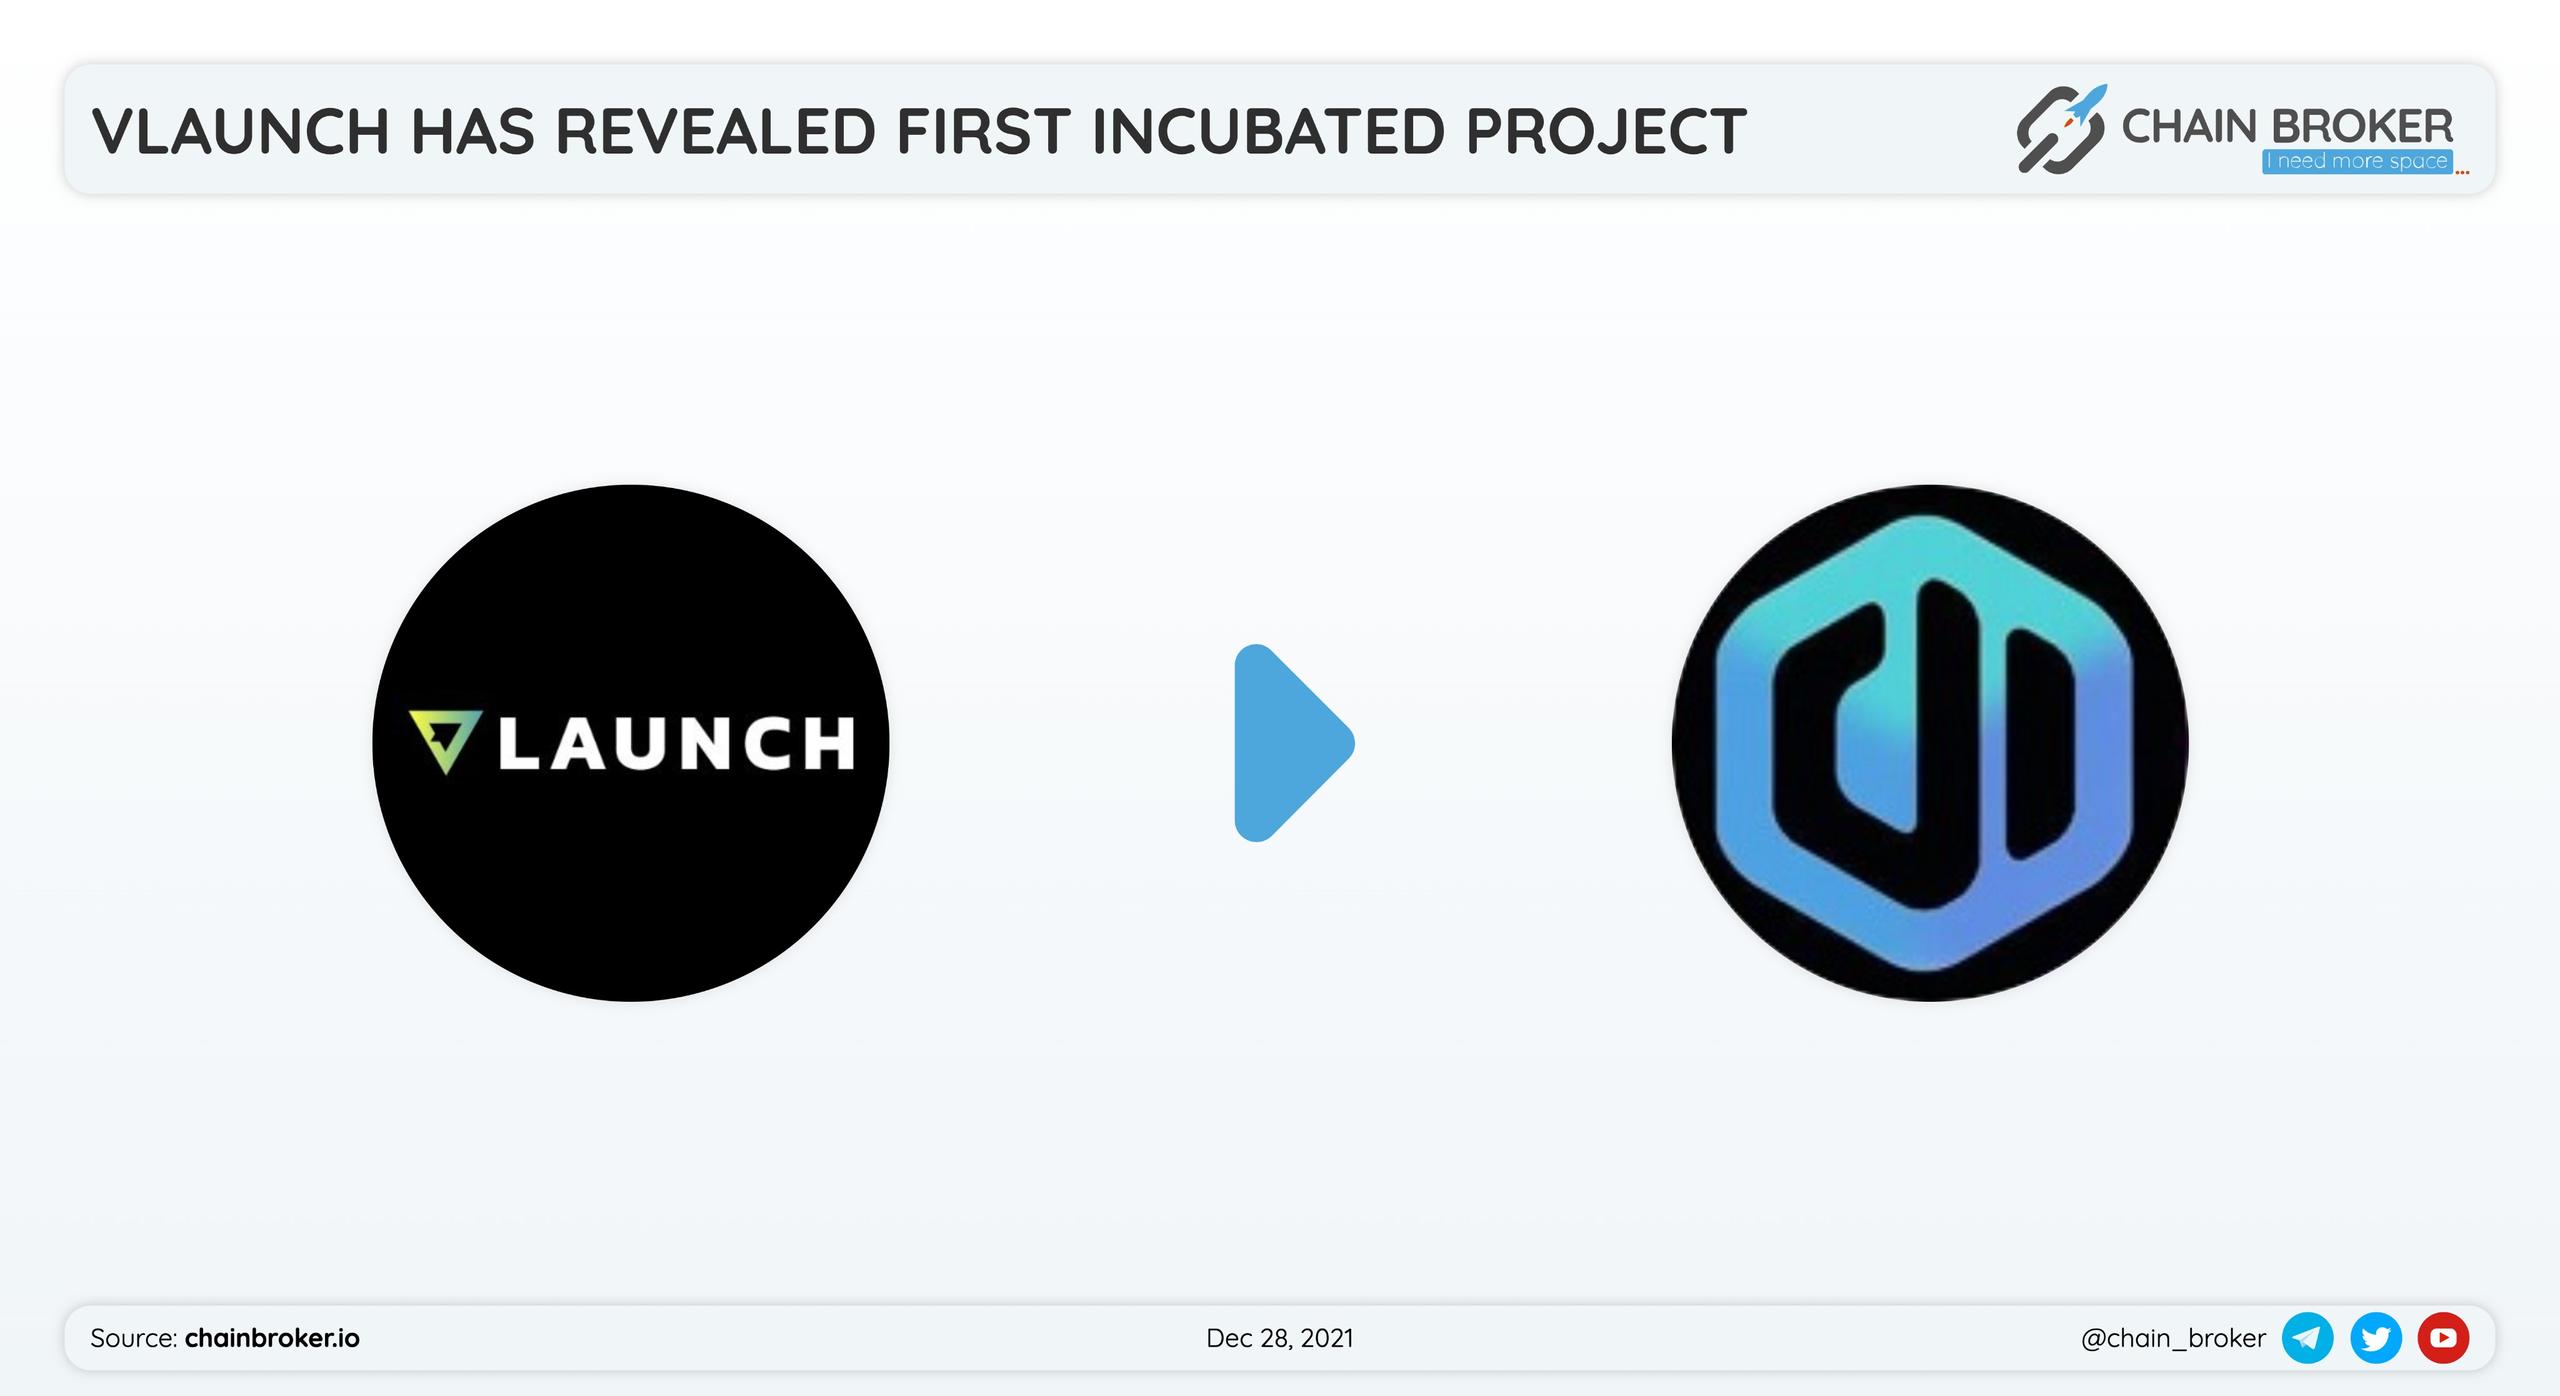 Decimated Game has partnered with VLaunch for a token launch.